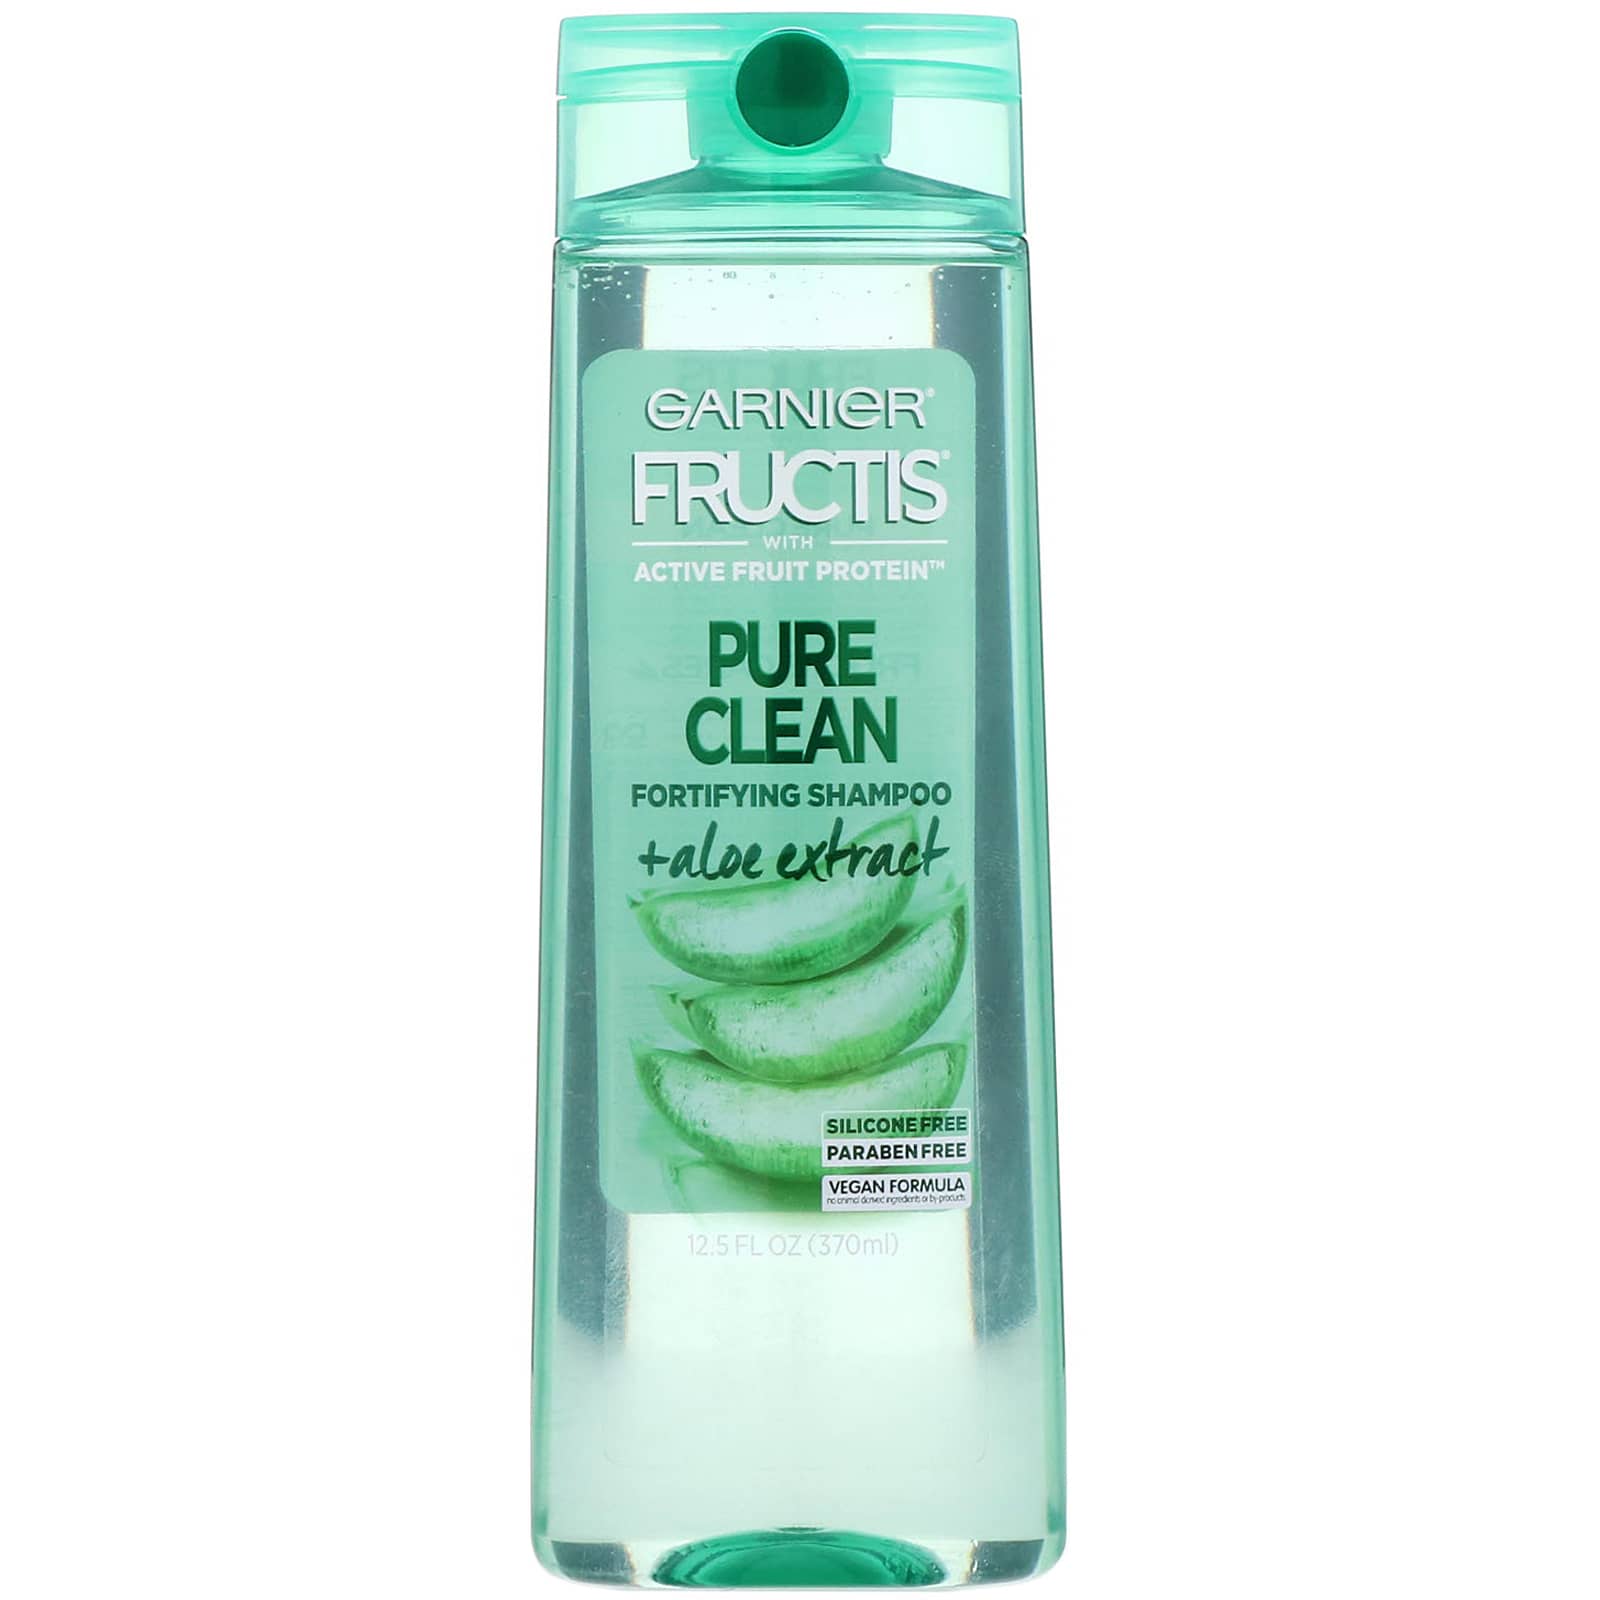 Garnier, Fructis, Pure Clean, Fortifying Shampoo with Aloe (370 ml)